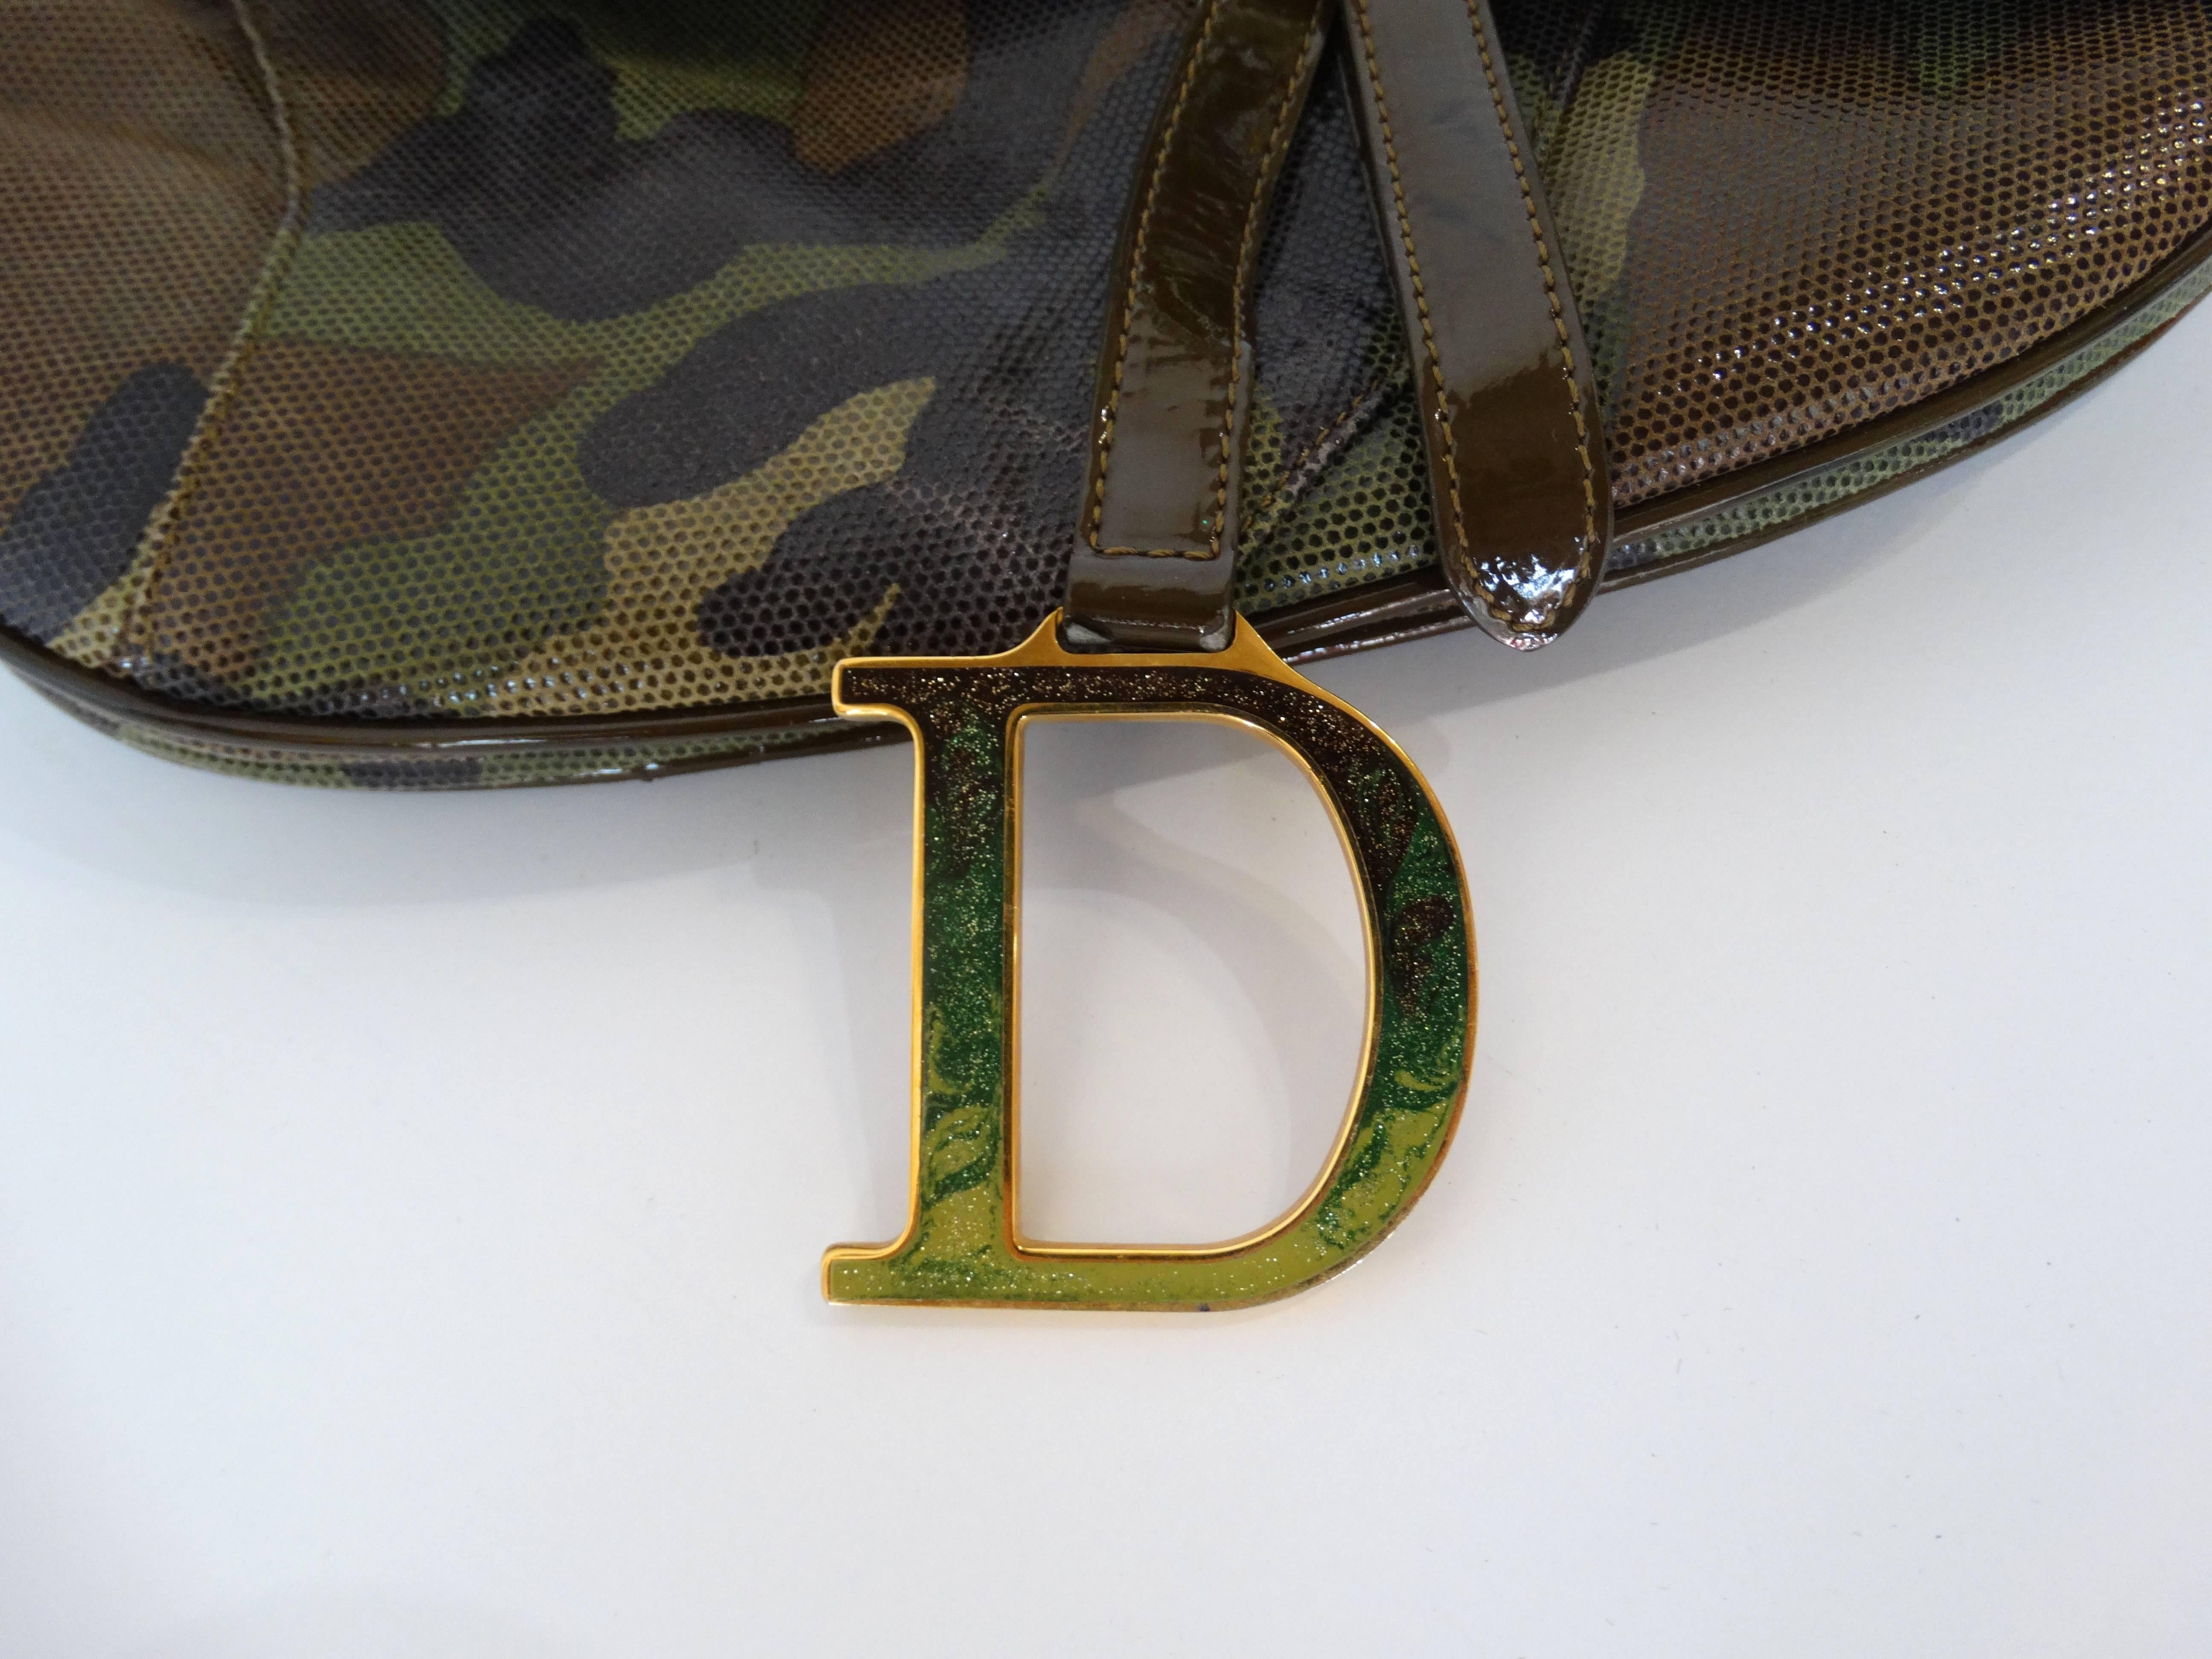 Christian Dior saddle bags are back in a big way! Here's your chance to nab yourself a saddle bag in the rare camouflage color-way! Made of a glossy mesh embossed camo printed leather. Hidden velcro closure beneath the top flap. Gold CD metal strap